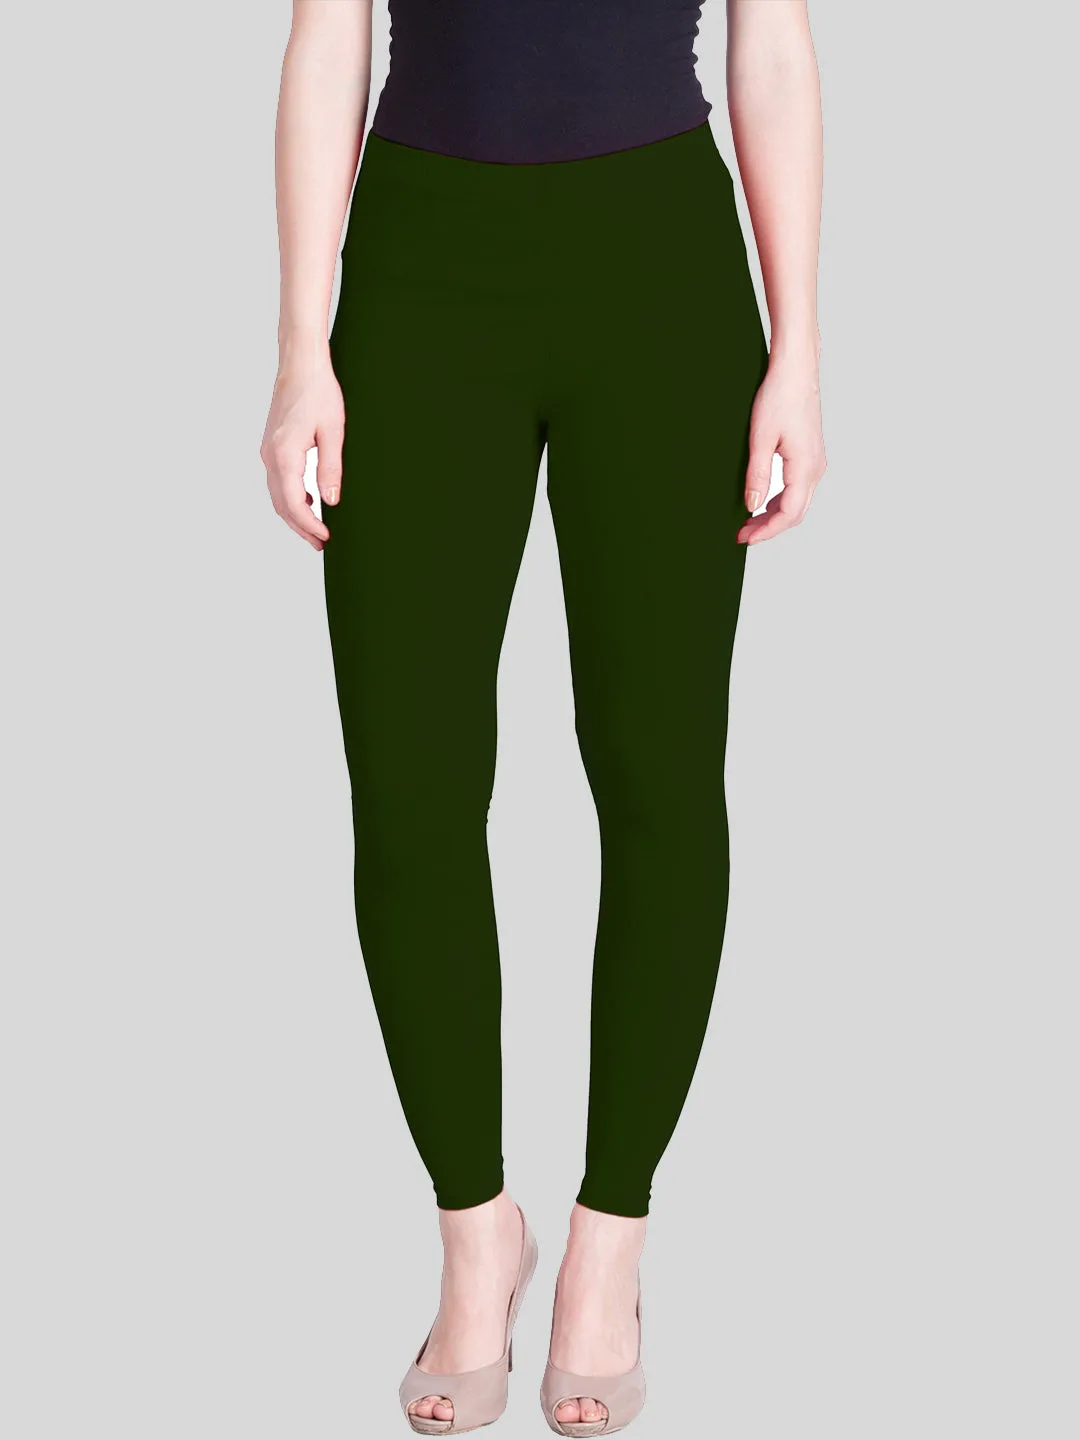 Buy STYLE PITARA Women's/Girls Soft and 4 Way Stretchable Ankle Length  Leggings Combo Pack of 2 (Size: 28) Black, Green at